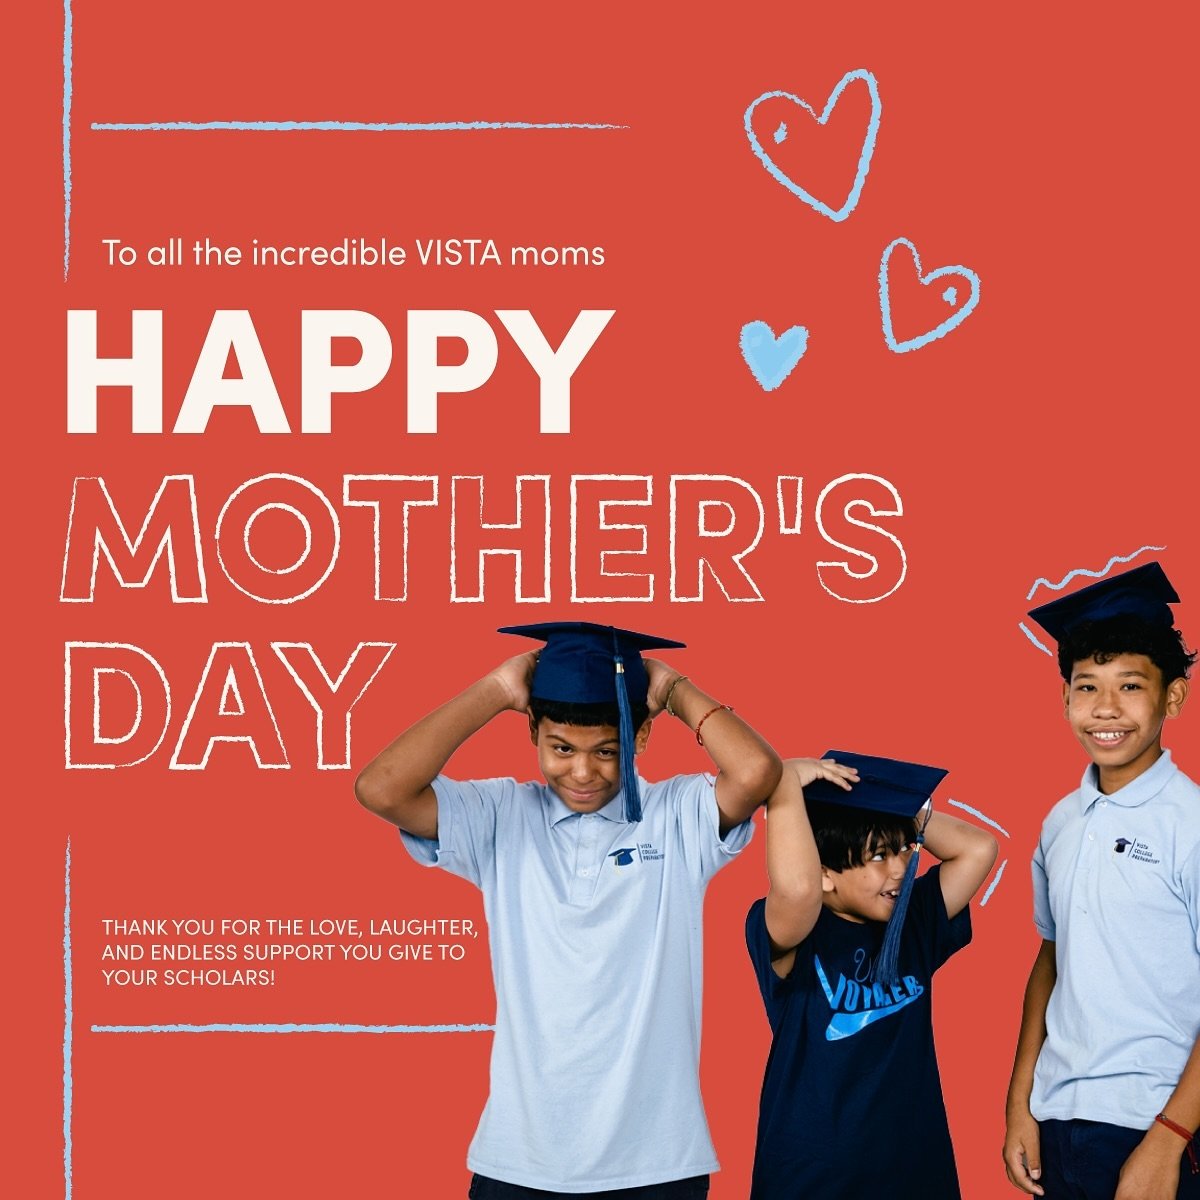 Happy Mother&rsquo;s Day to all the incredible VISTA moms! Thank you for the love, laughter, and endless support you give to your scholars. 💐✨ #MothersDay #CelebrateMom #Gratitude
_______________

&iexcl;Feliz D&iacute;a de las Madres a todas las in